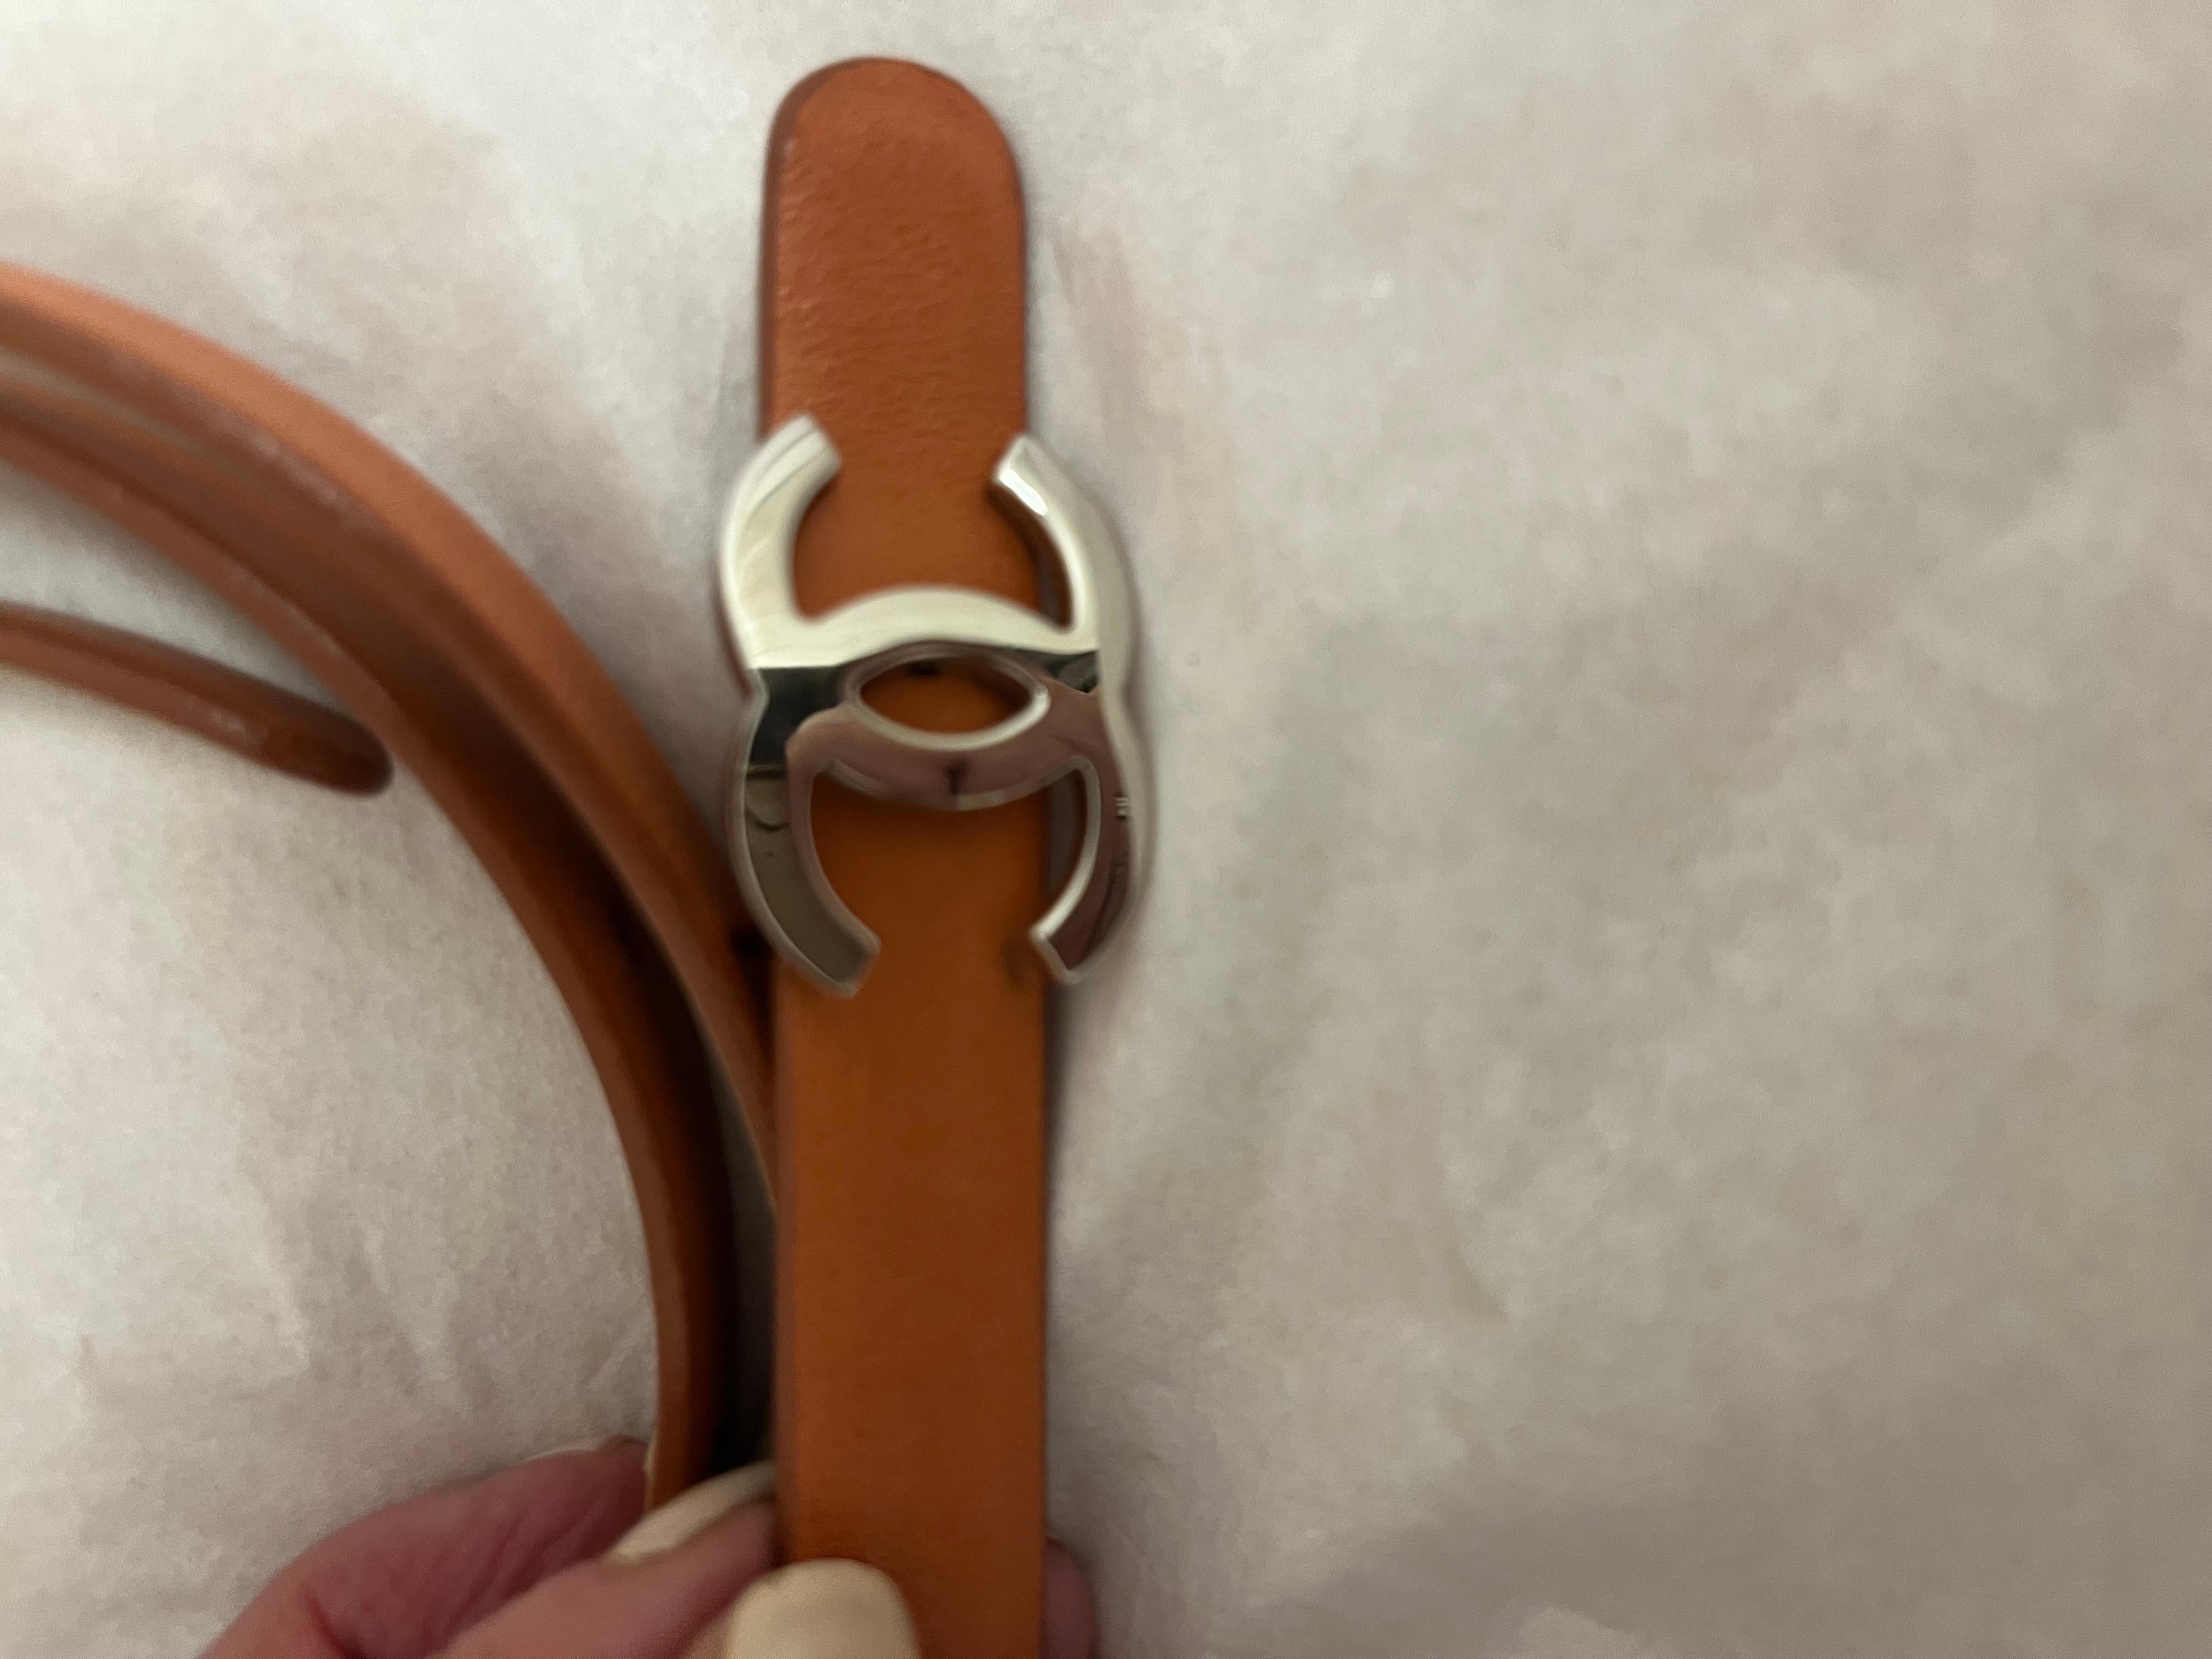 This is a classic accessory from Chanel! The Chanel Coco skinny belt is tan in color which goes with almost any outfit. The belt has a silver-tone interlocking logo buckle (detachable) with peg in hole closure/clasp. There is very little wear on the